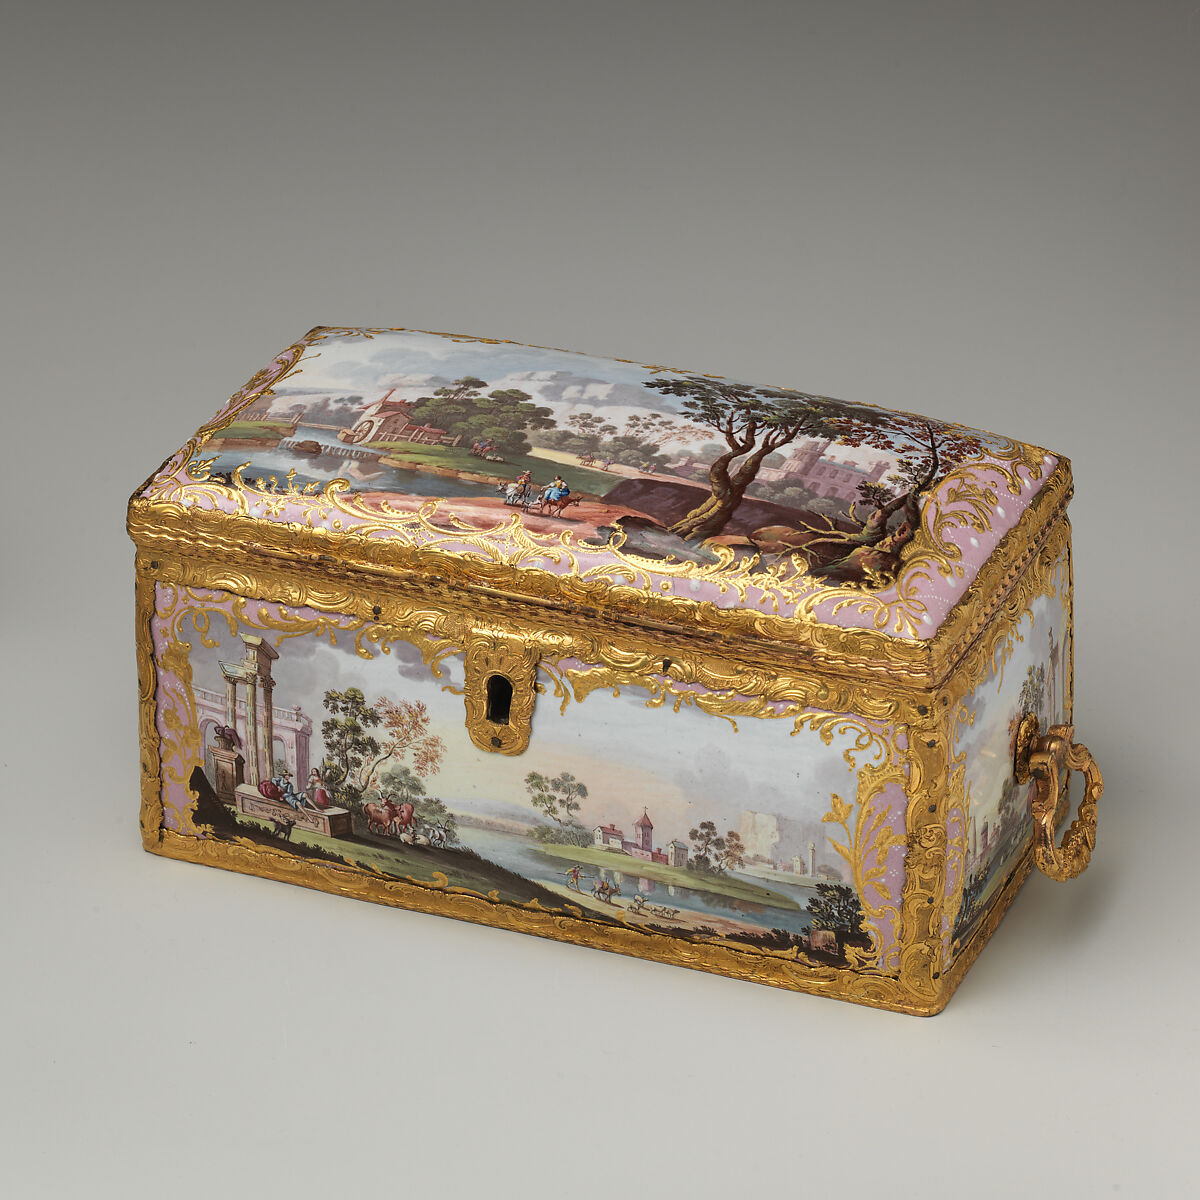 Tea casket (part of a set), White enamel on copper painted in polychrome enamels, British, South Staffordshire 